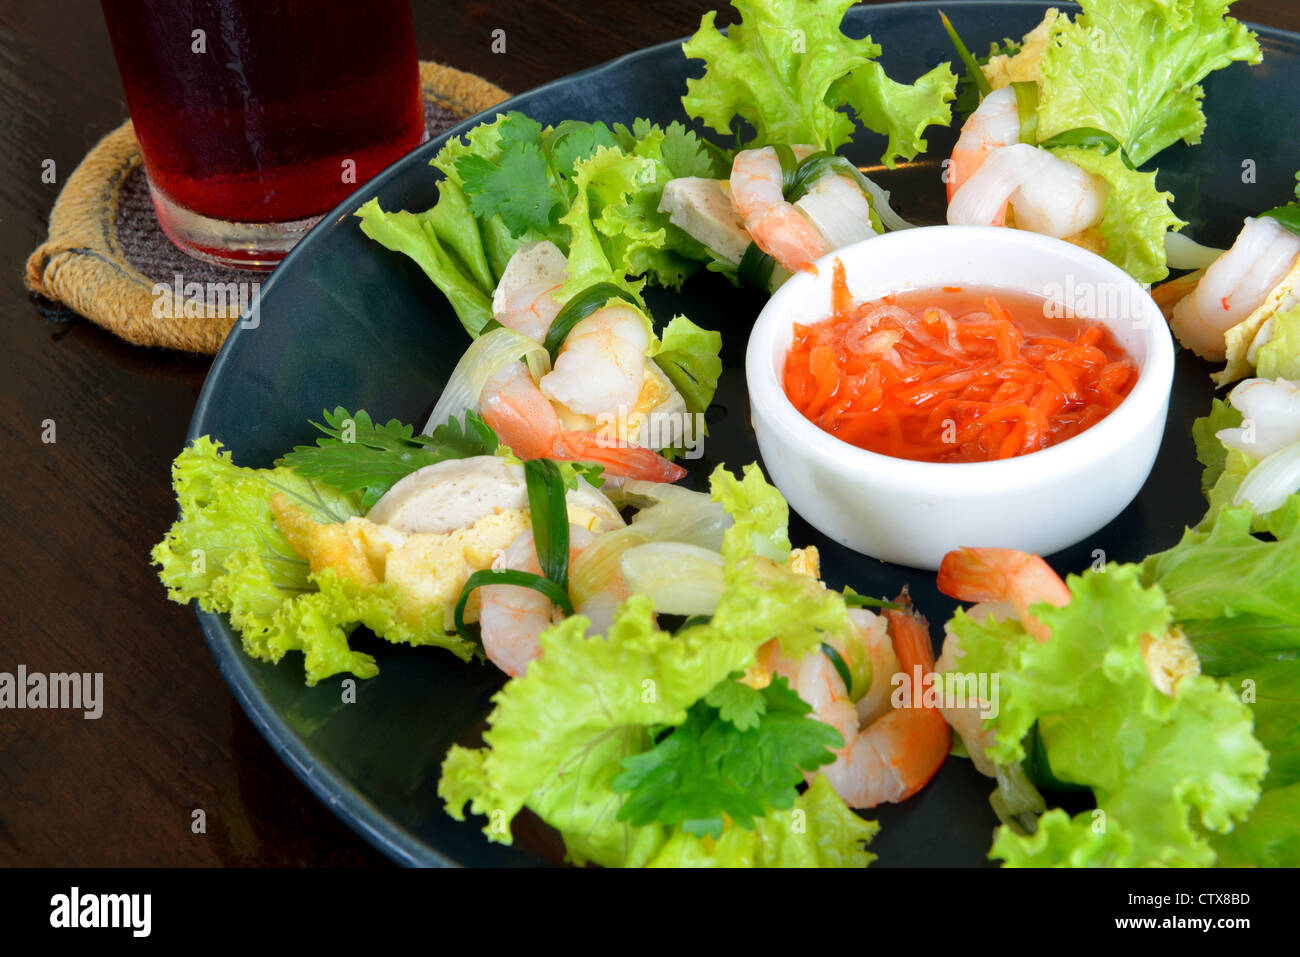 Vietnam food style call ' Shrimp salad' served on the black wooden table Stock Photo